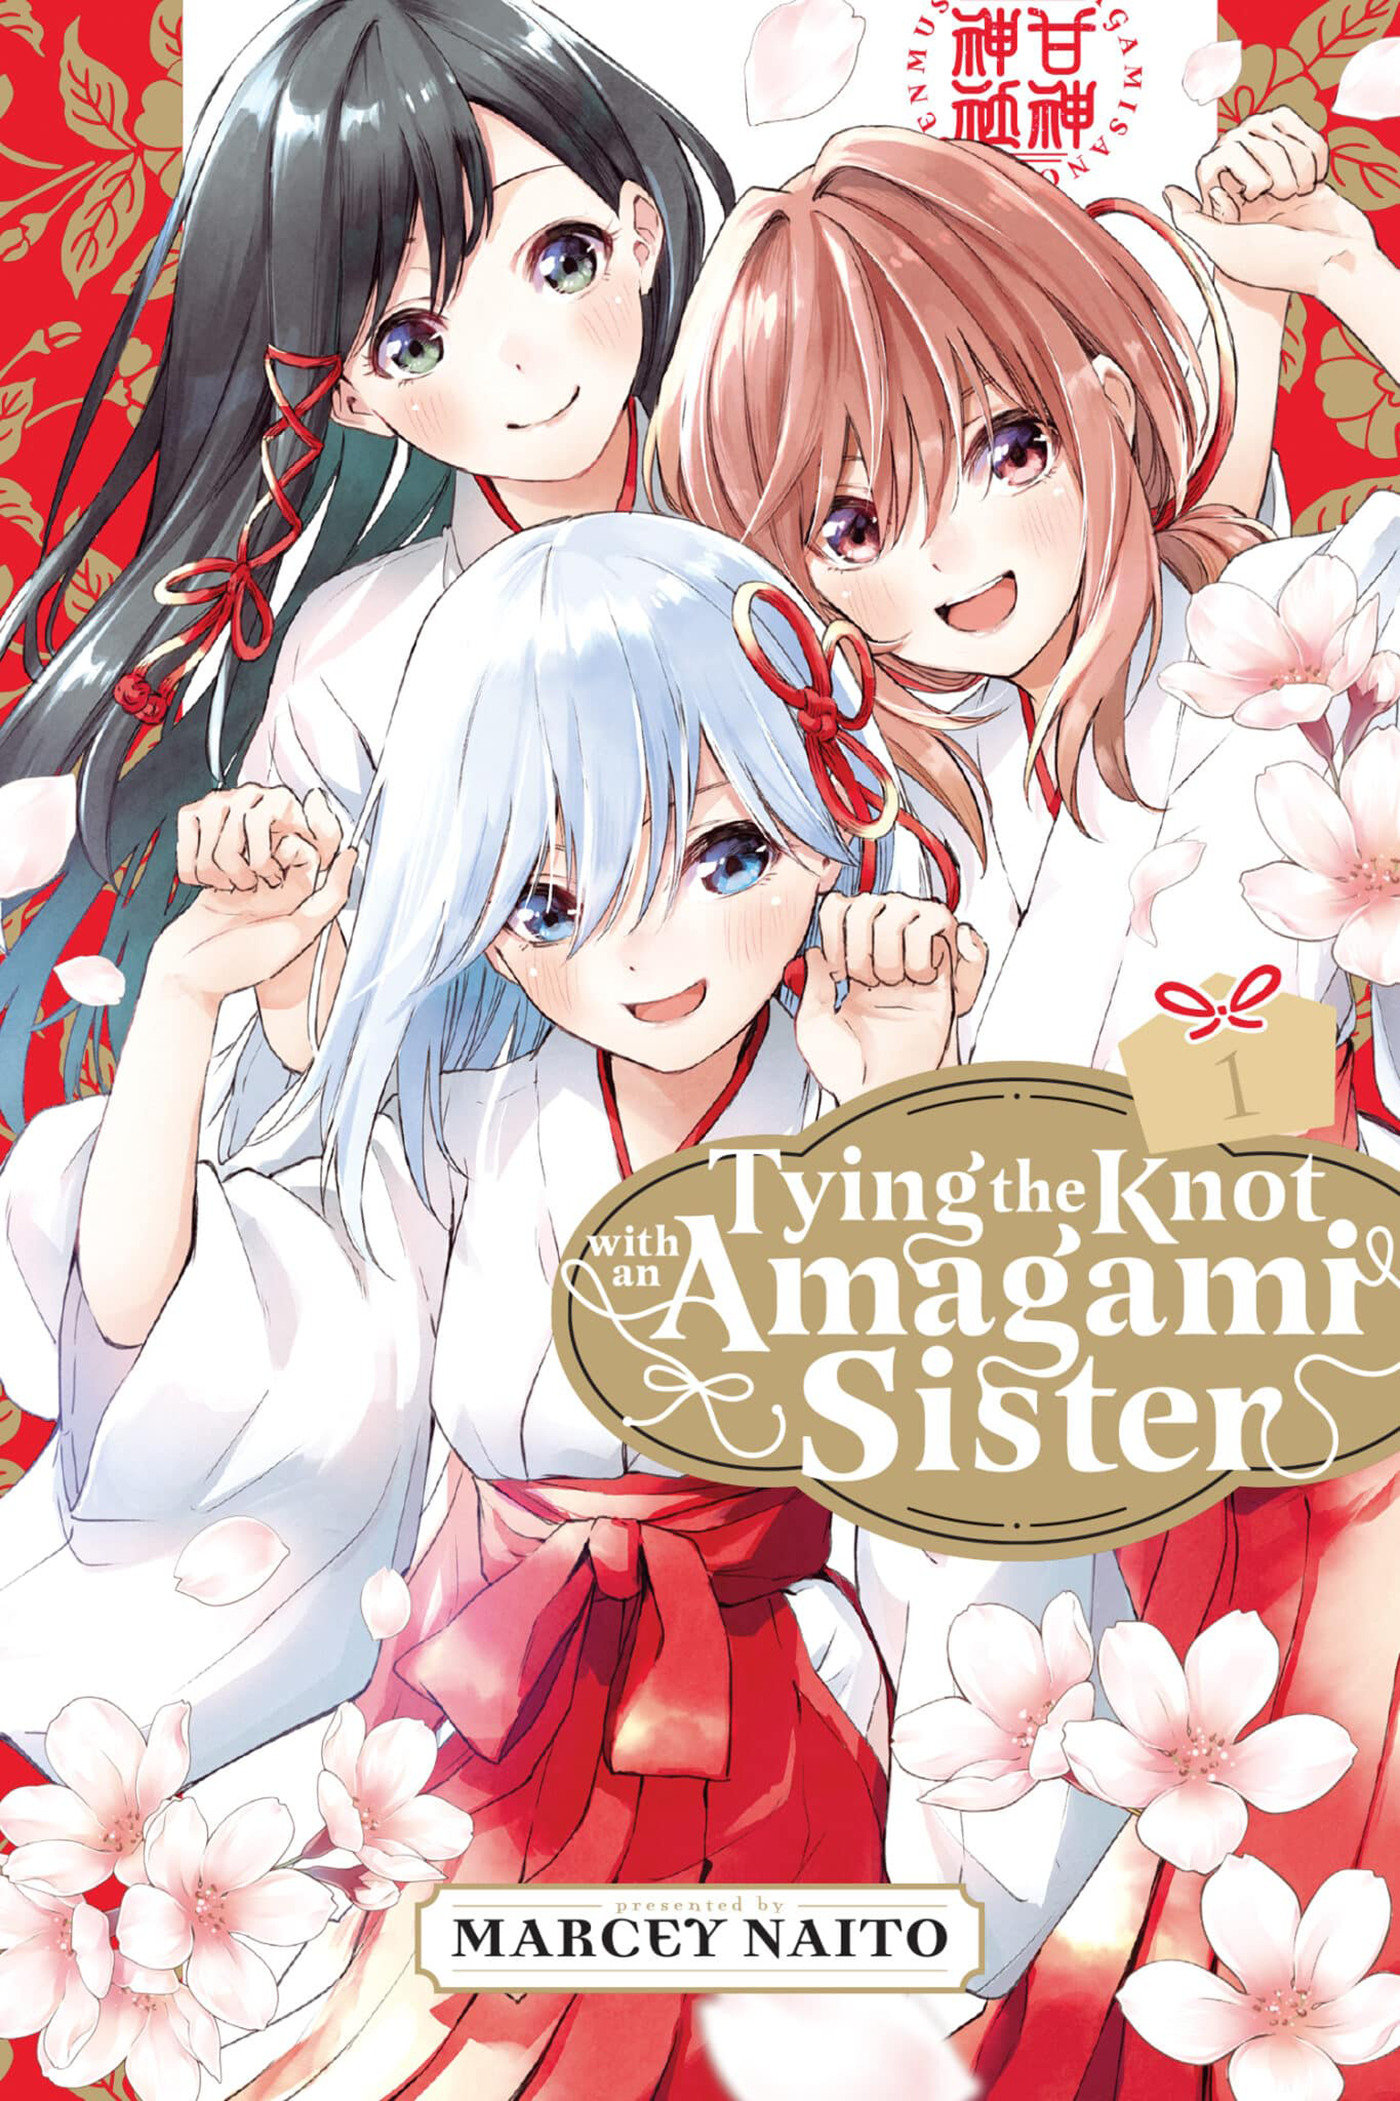 Tying the Knot with an Amagami Sister Manga Volume 1